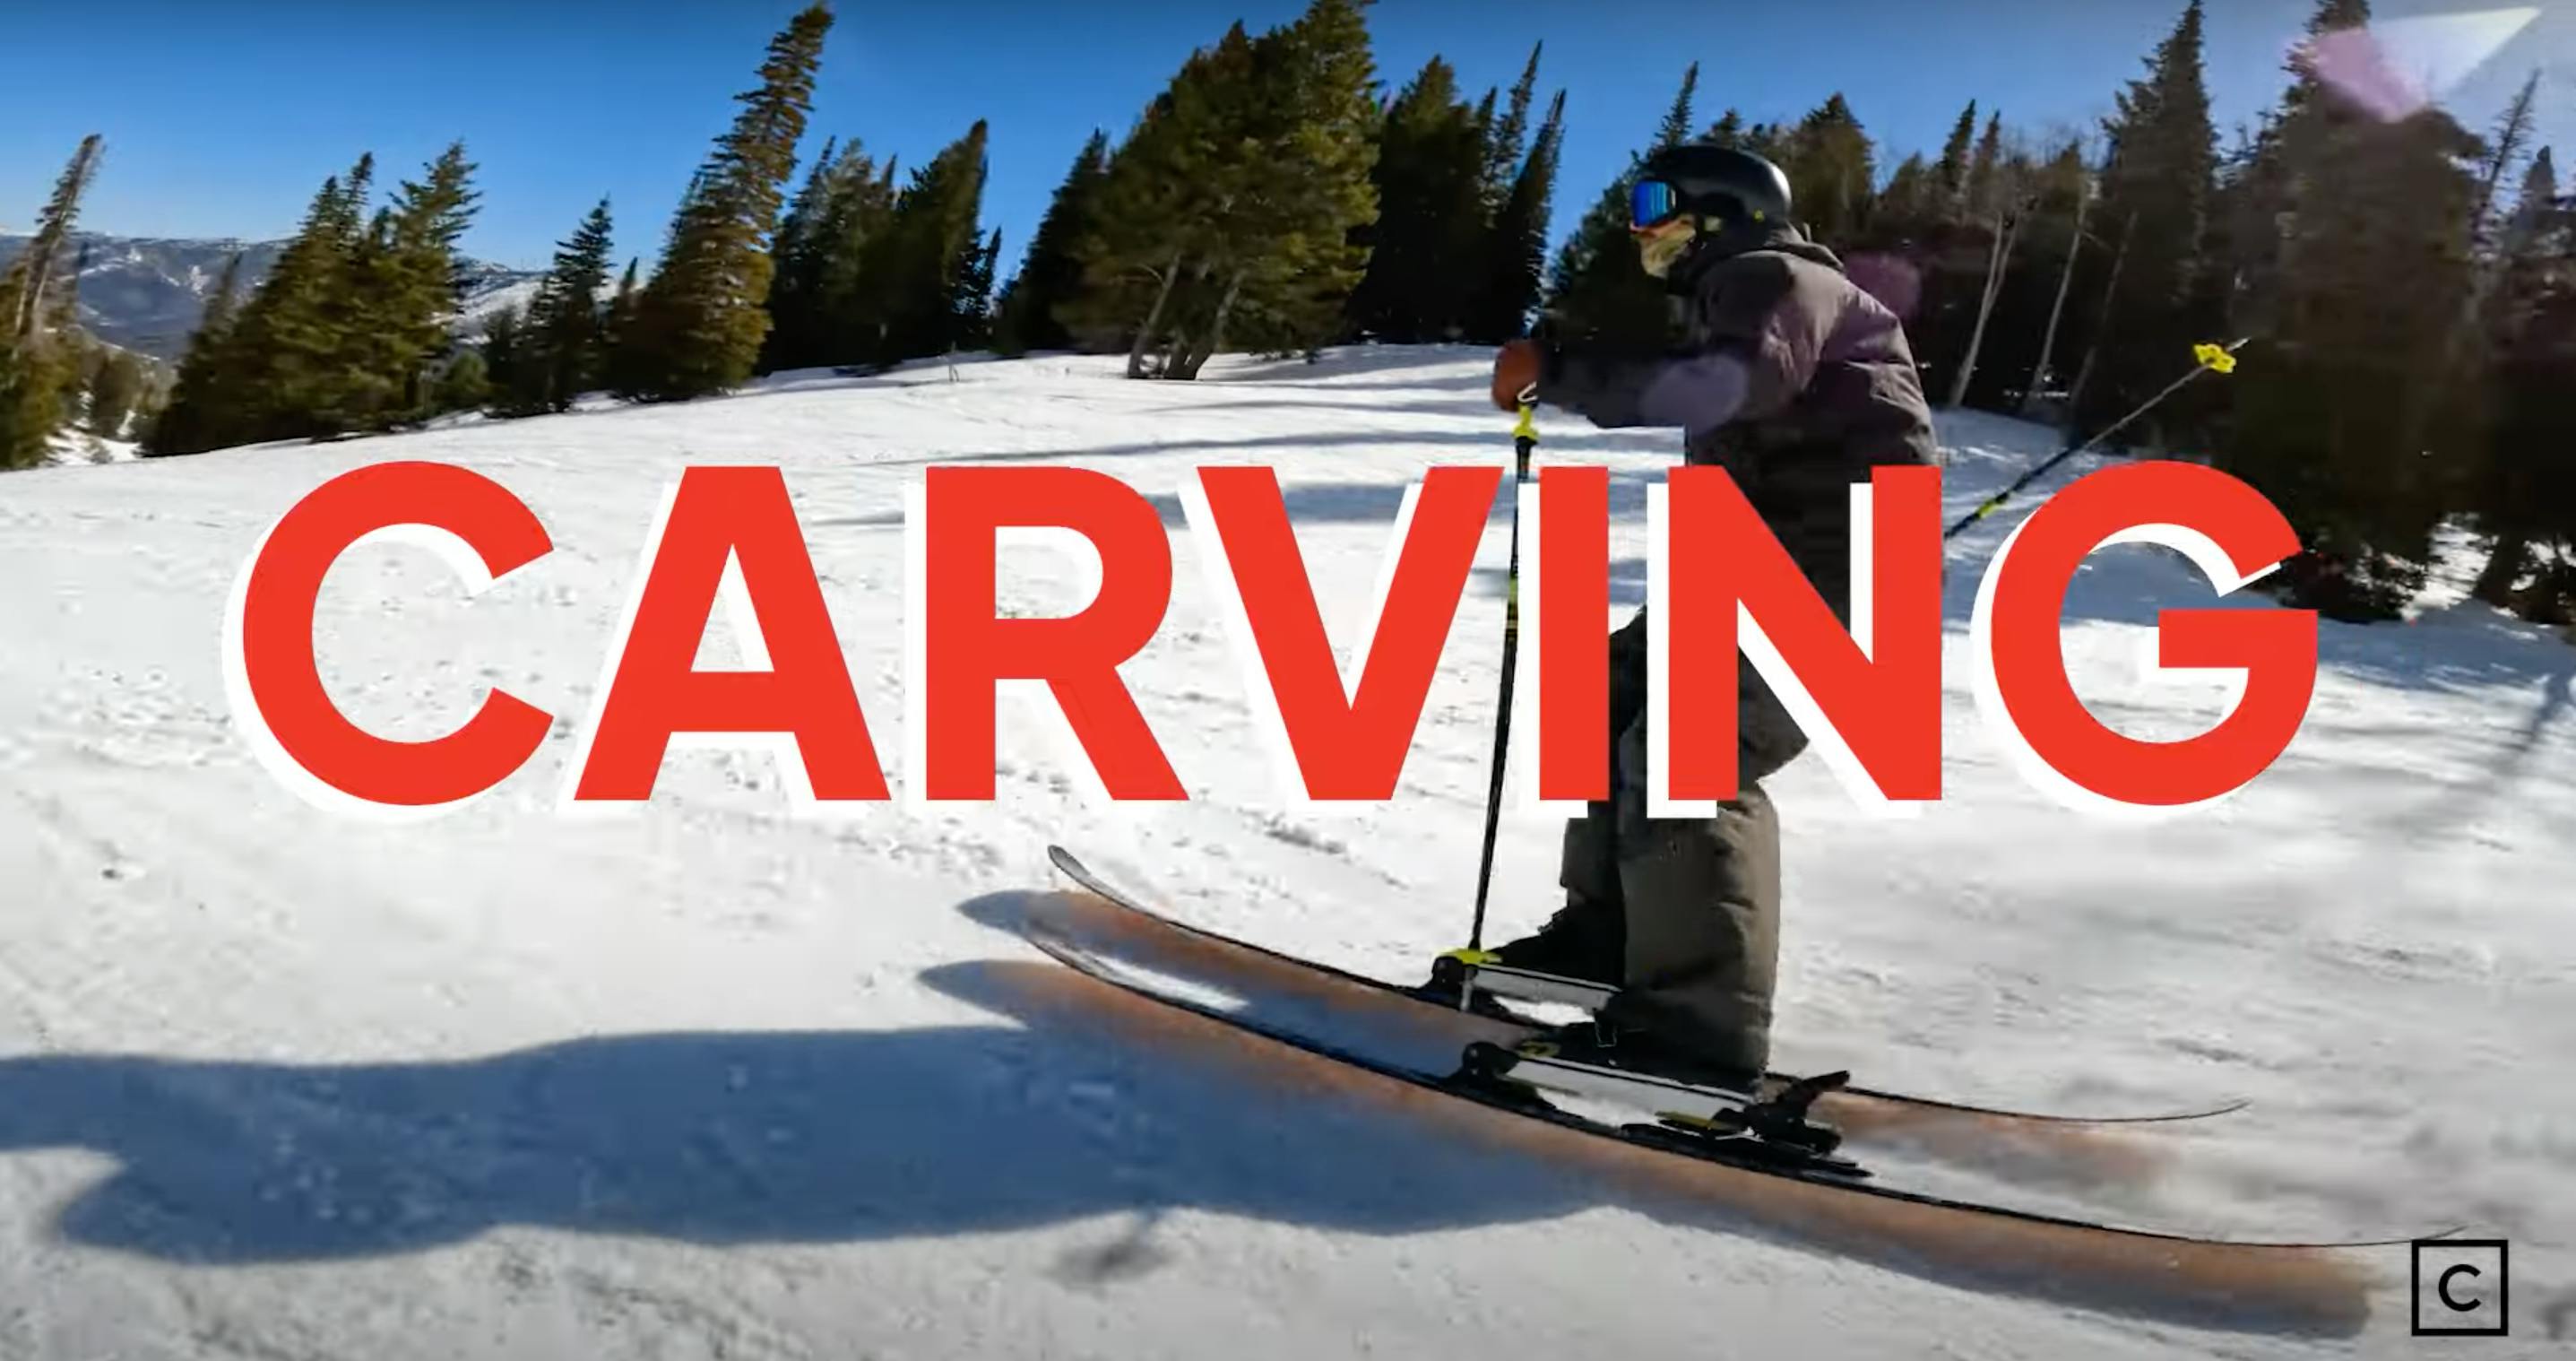 A skier turning down a slope with the word "Carving" overlayed. 